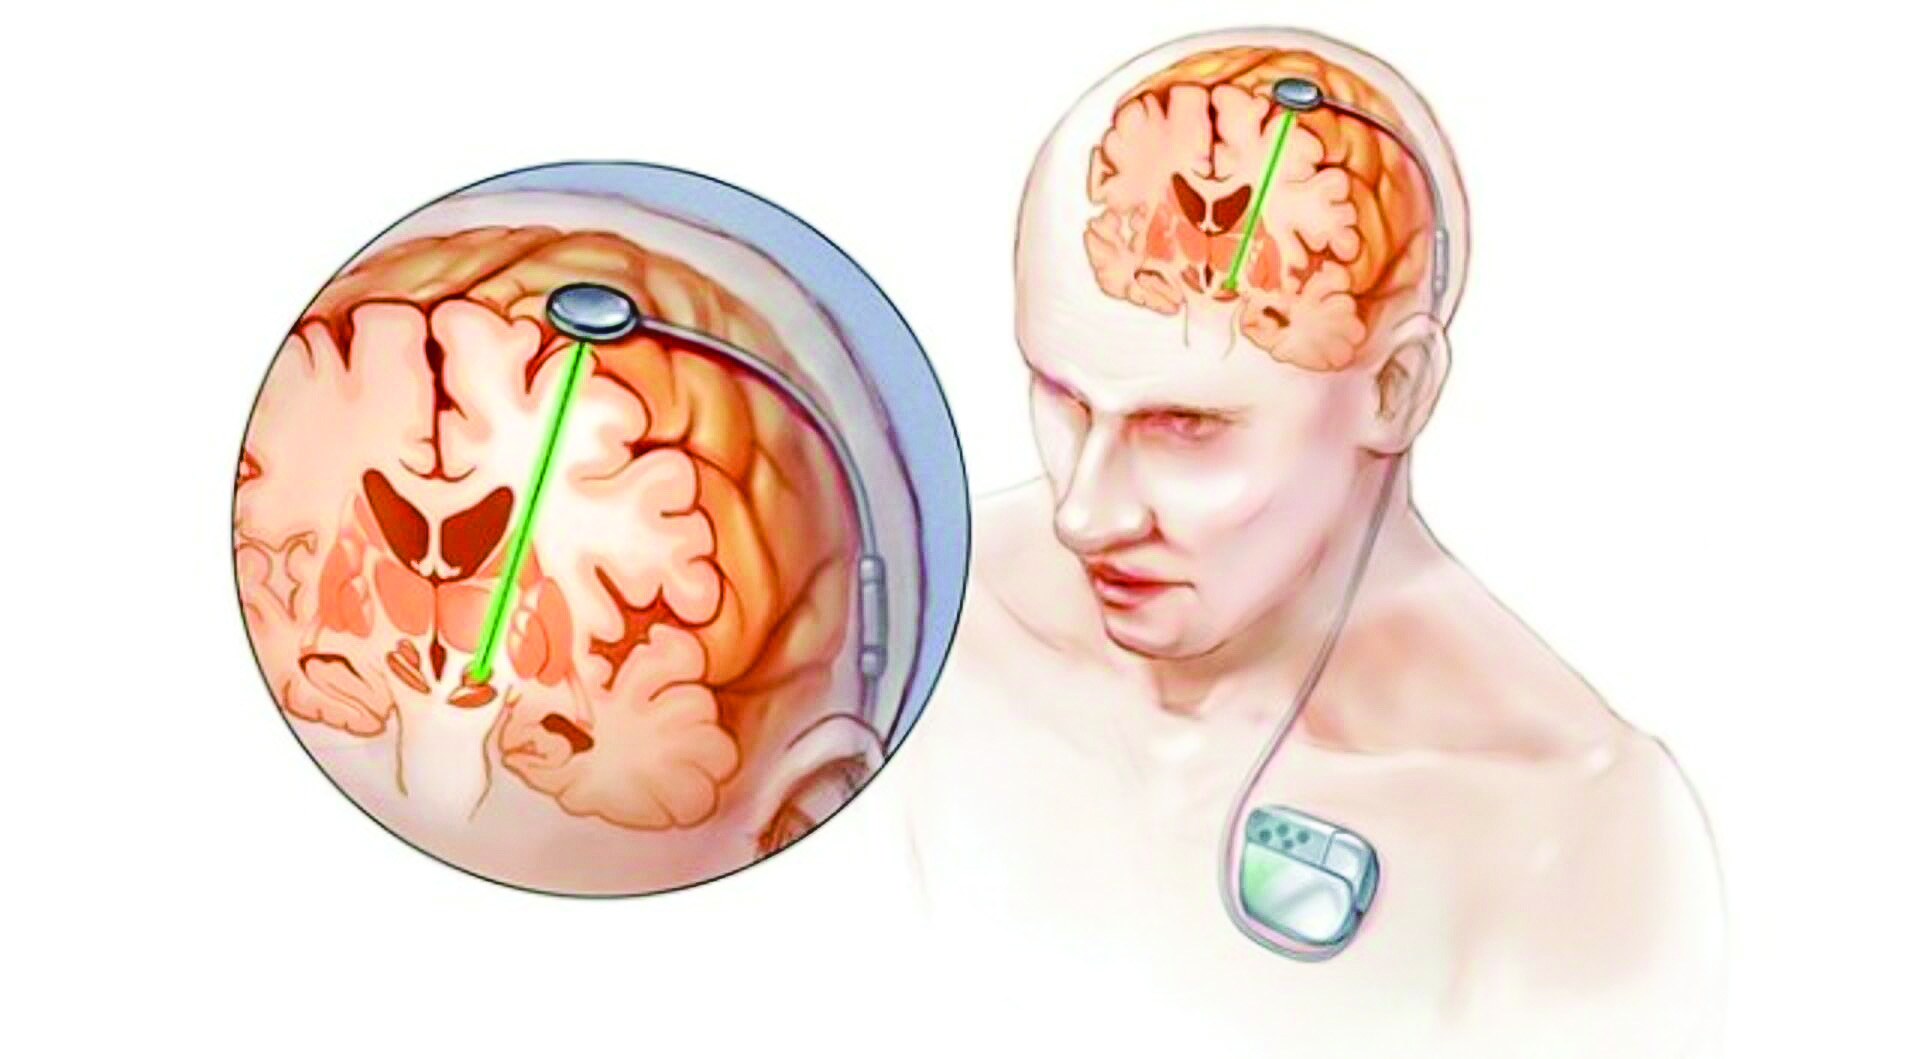 How deep brain stimulation surgery has been improving the lives of patients with Parkinson’s